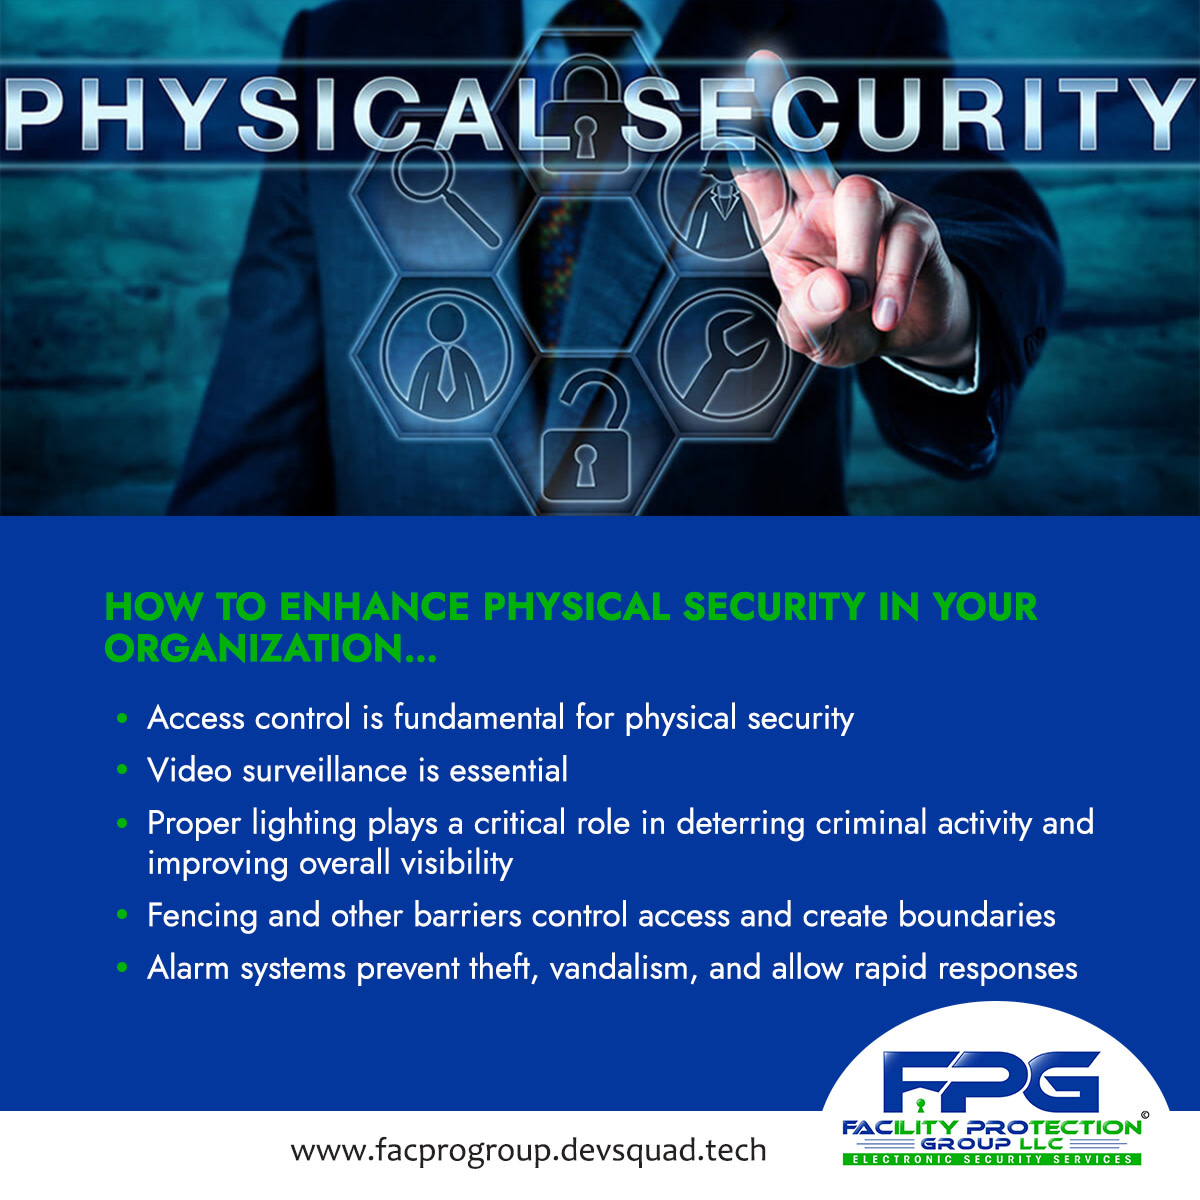 Strategies for Enhancing Physical Security...
LEARN MORE... facprogroup.com/12-strategies-…

#integratedsecurity #securitysolutions #smartsecurity #integratedsurveillance #accesscontrol #securityintegration #unifiedsecuritysystems #tampa #hillsboroughcounty #florida #centralflorida